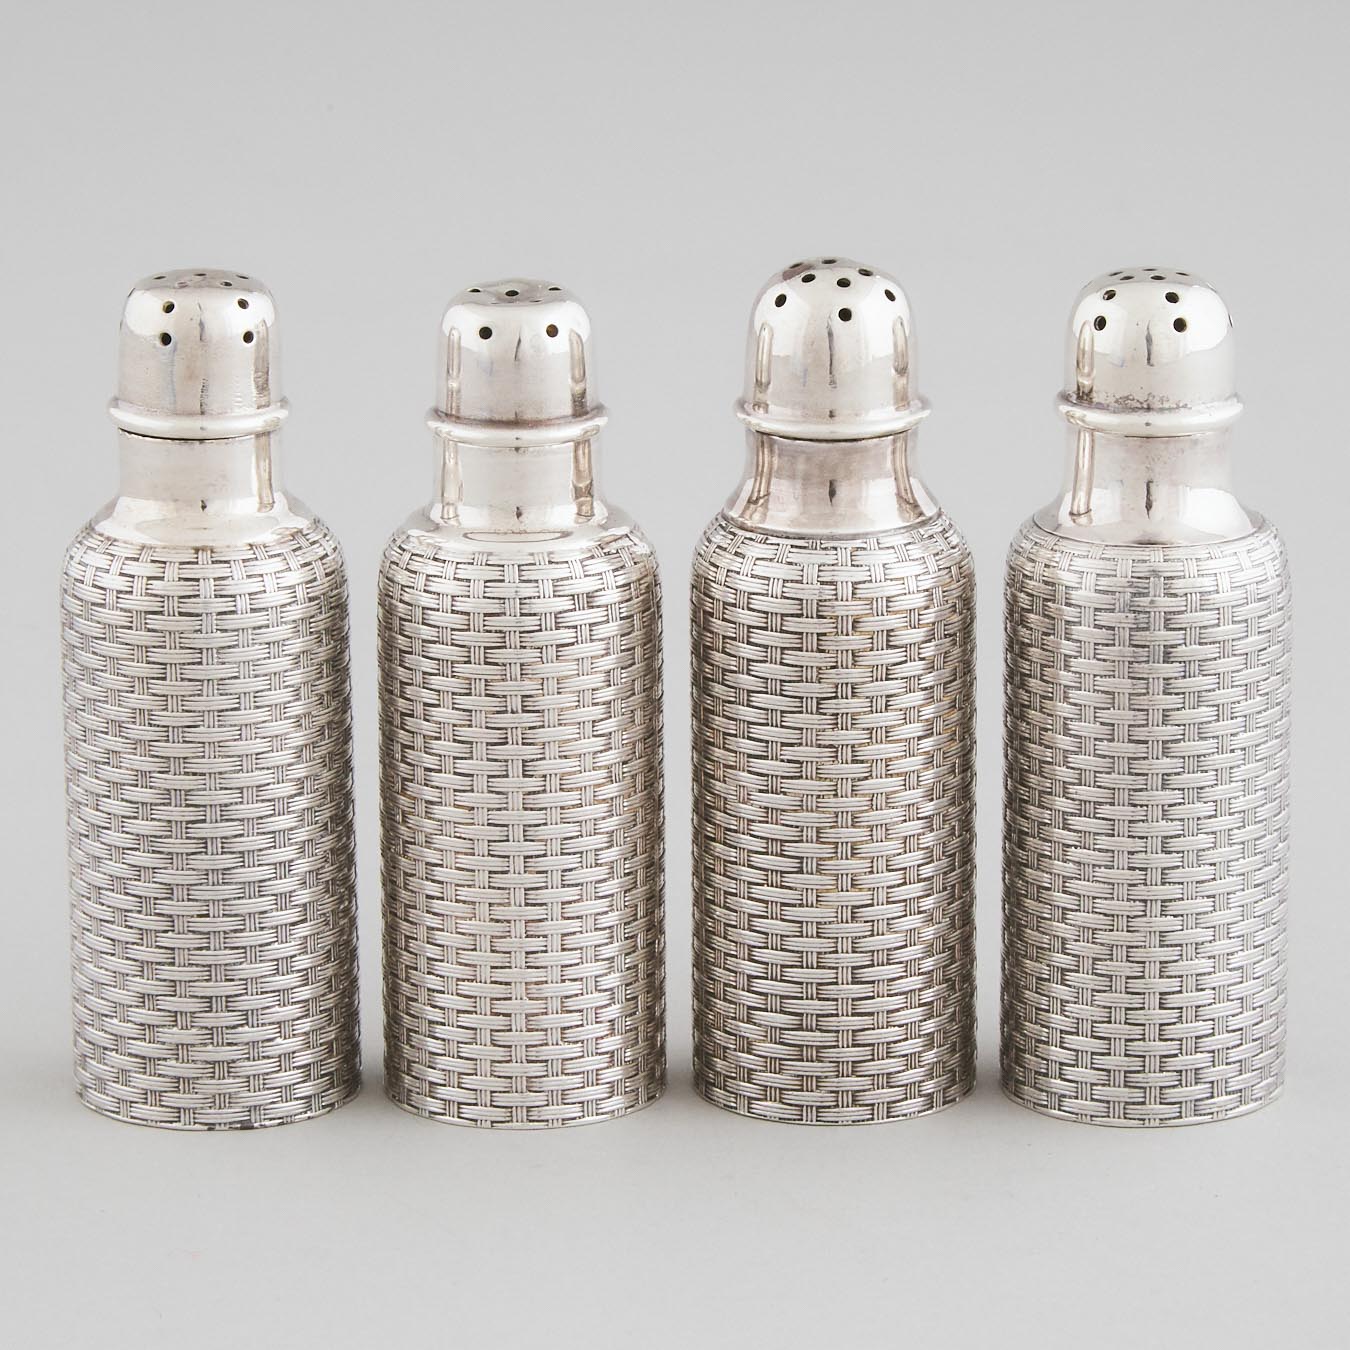 Set of Four American Silver Salt and Pepper Casters, Whiting Mfg. Co., New York, N.Y., early 20th century